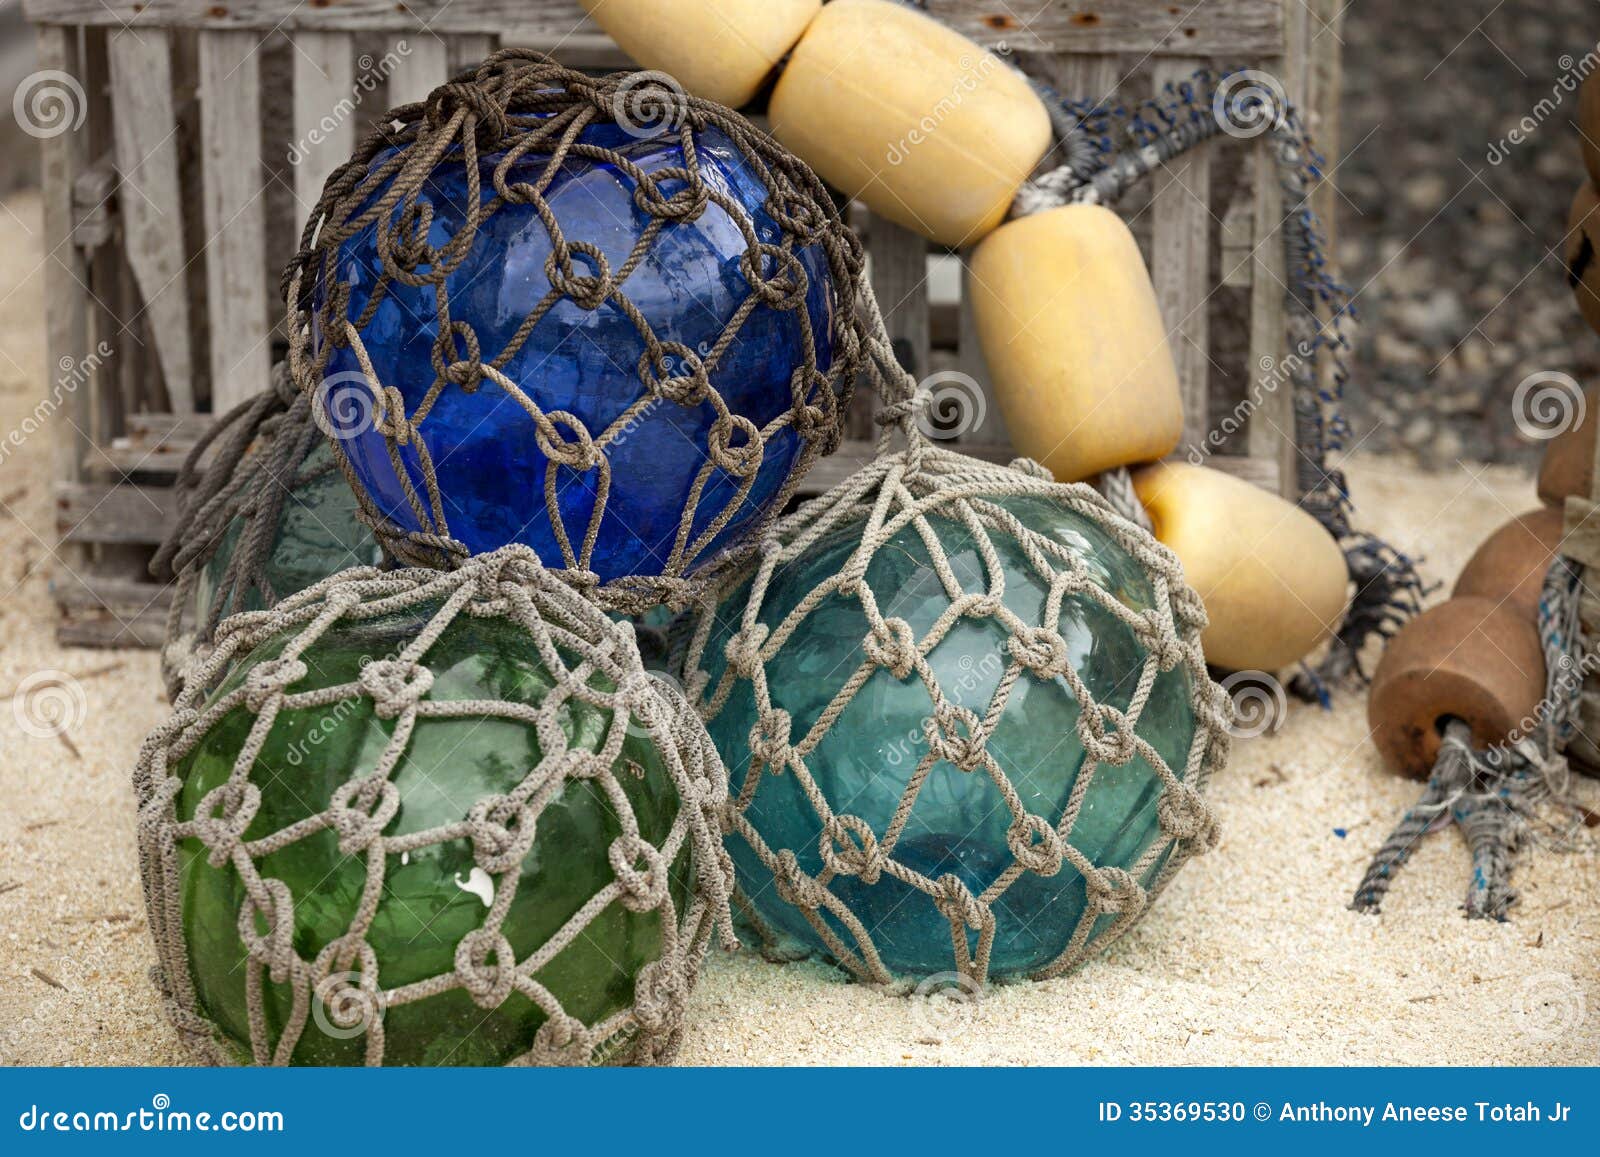 100+ Glass Fishing Floats Stock Photos, Pictures & Royalty-Free